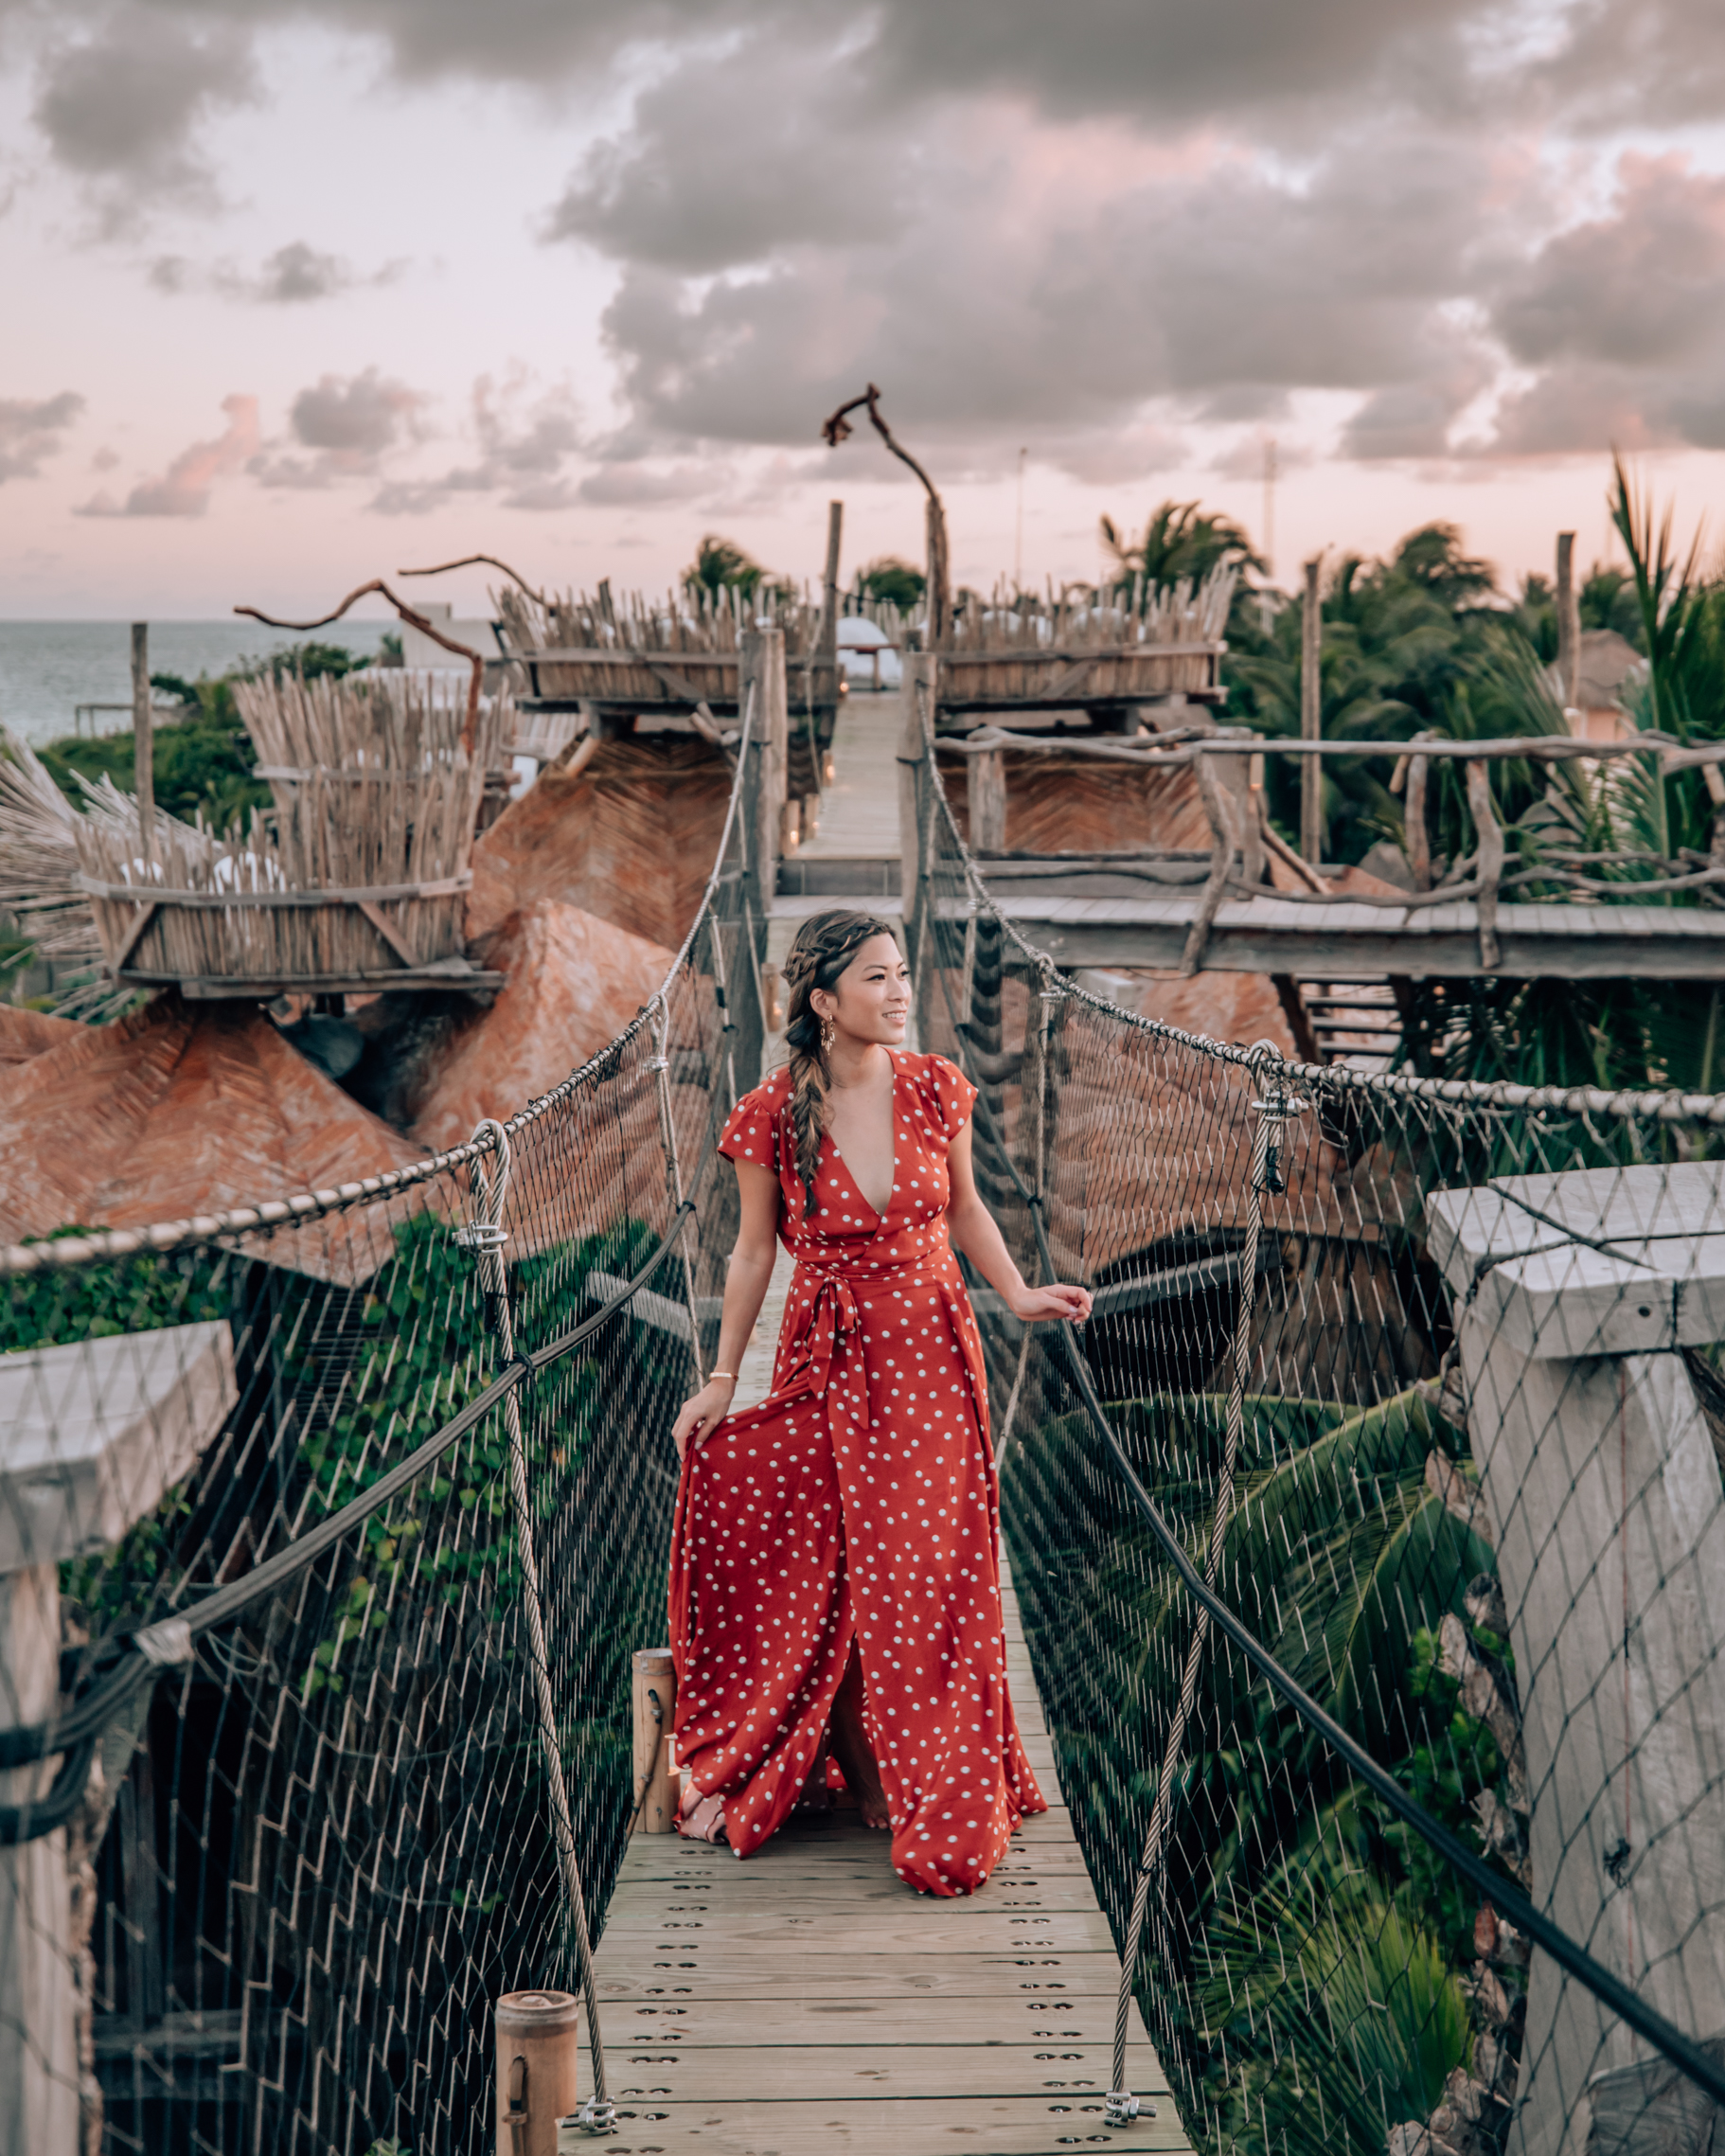 MOST INSTAGRAMMABLE PLACES IN TULUM